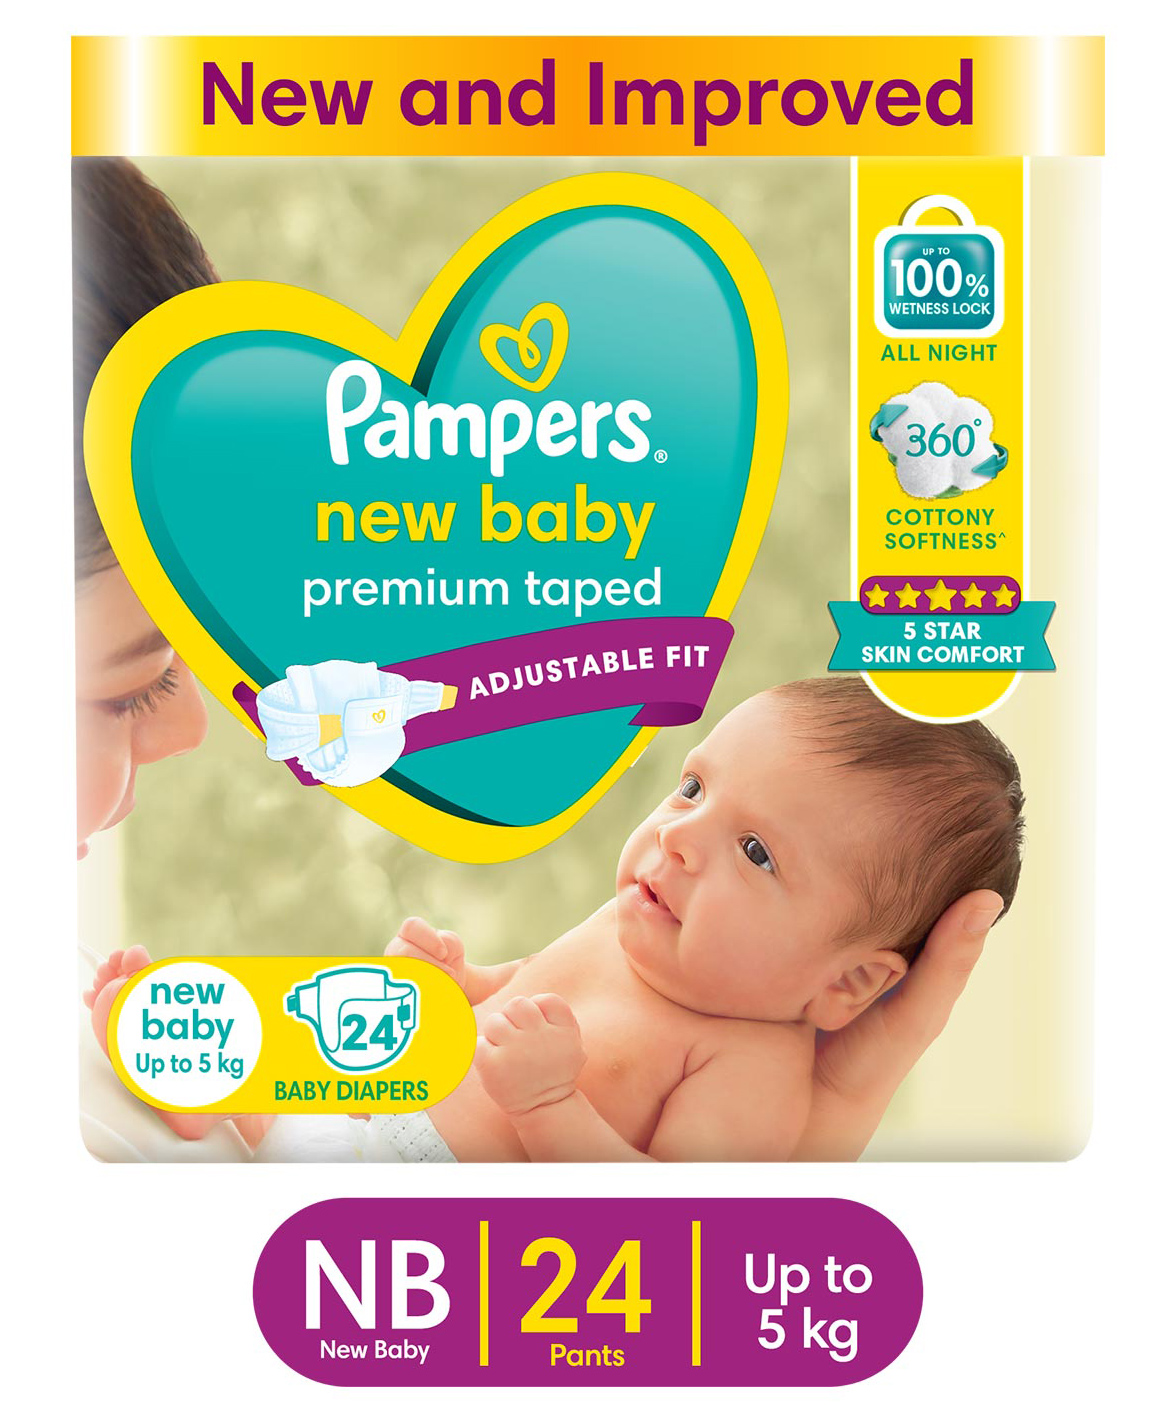 newborn baby diapers pampers